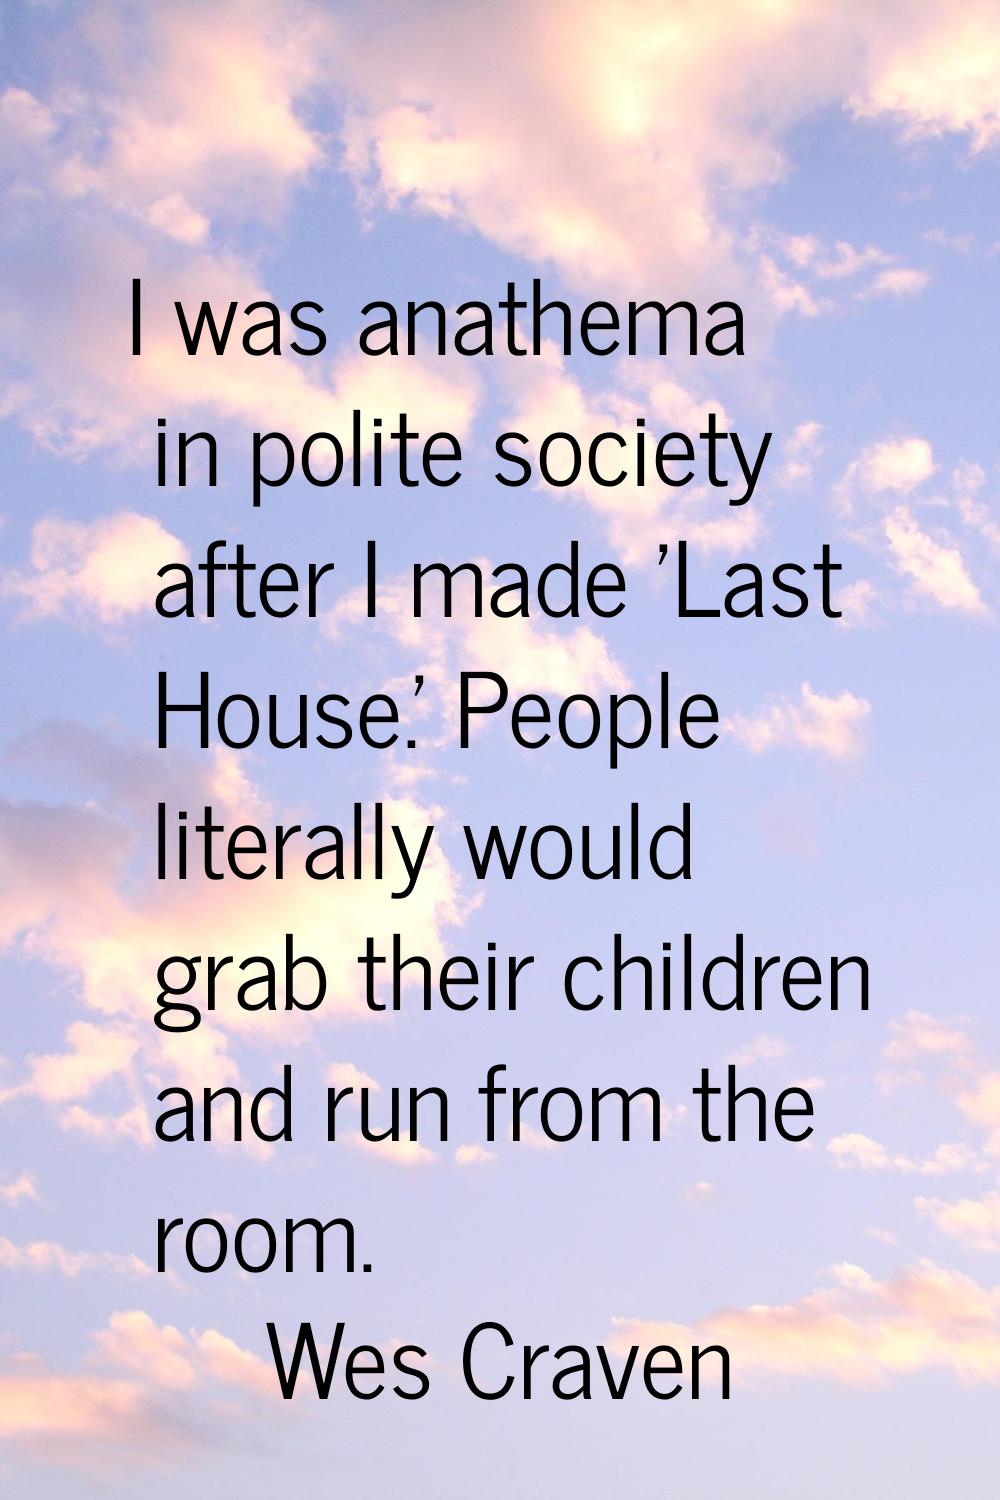 I was anathema in polite society after I made 'Last House.' People literally would grab their child